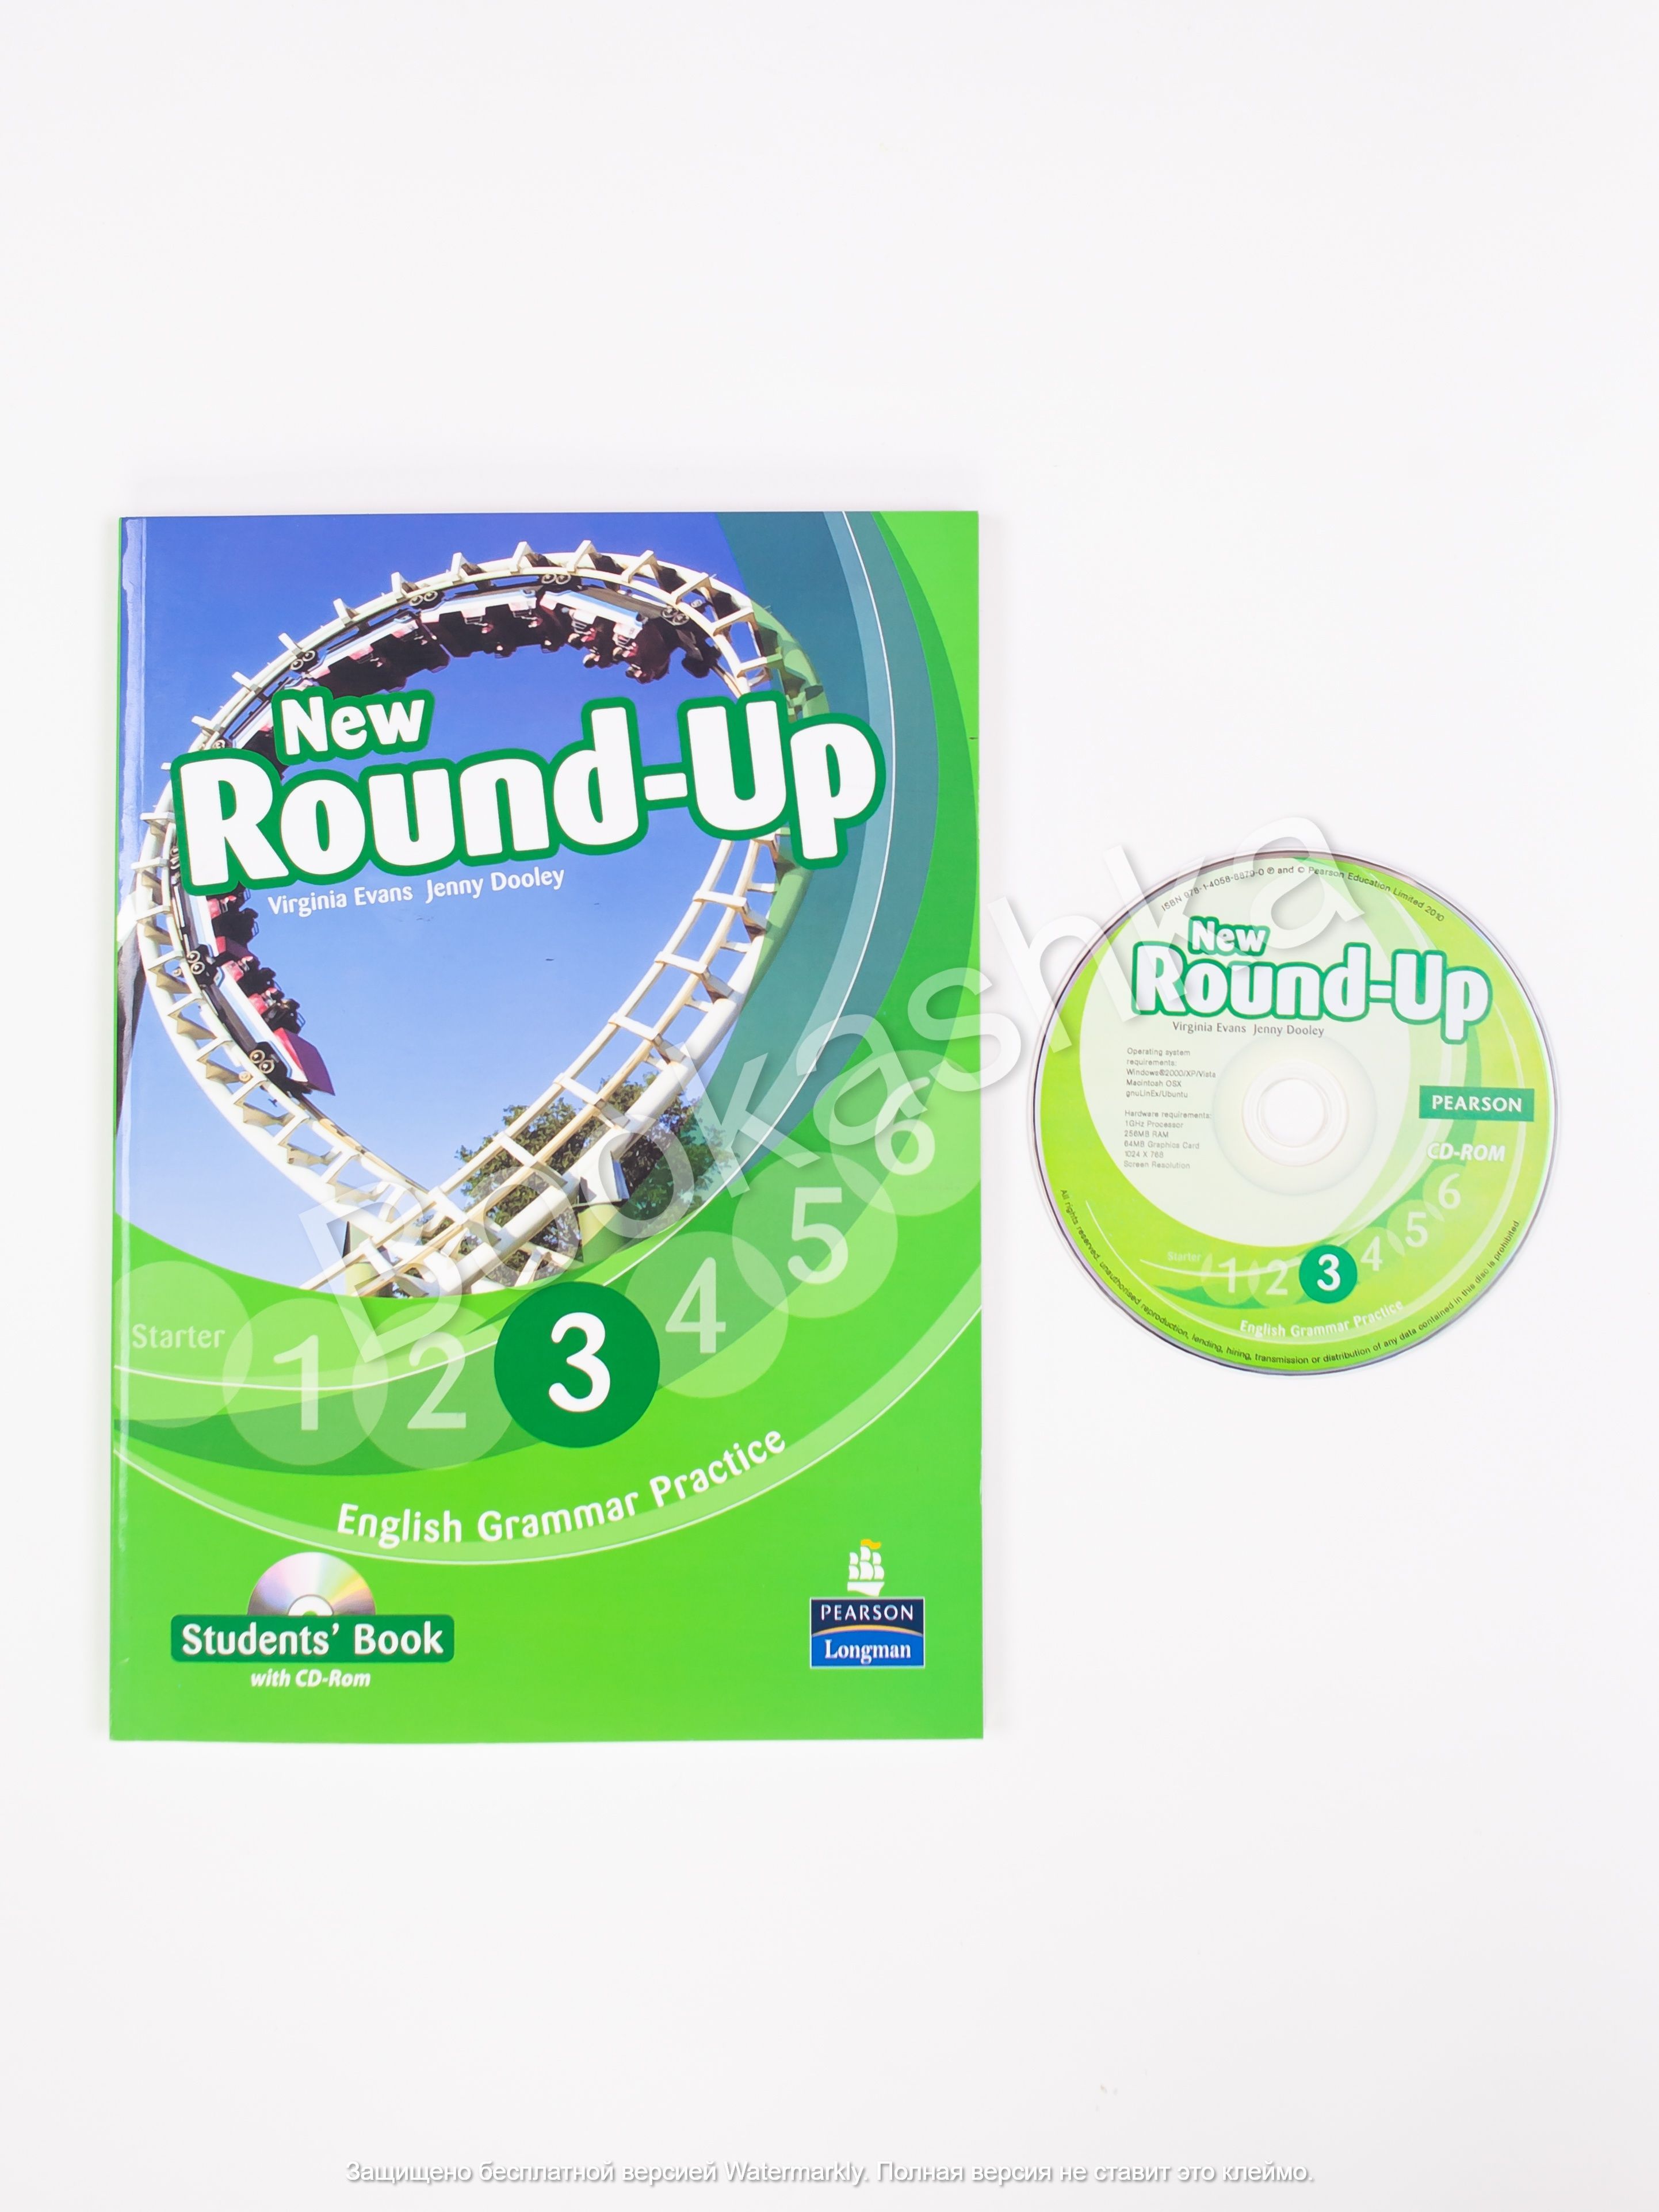 Round up 1. New Round up 3. New Round up 1. New Round up 2. New round up 3 students